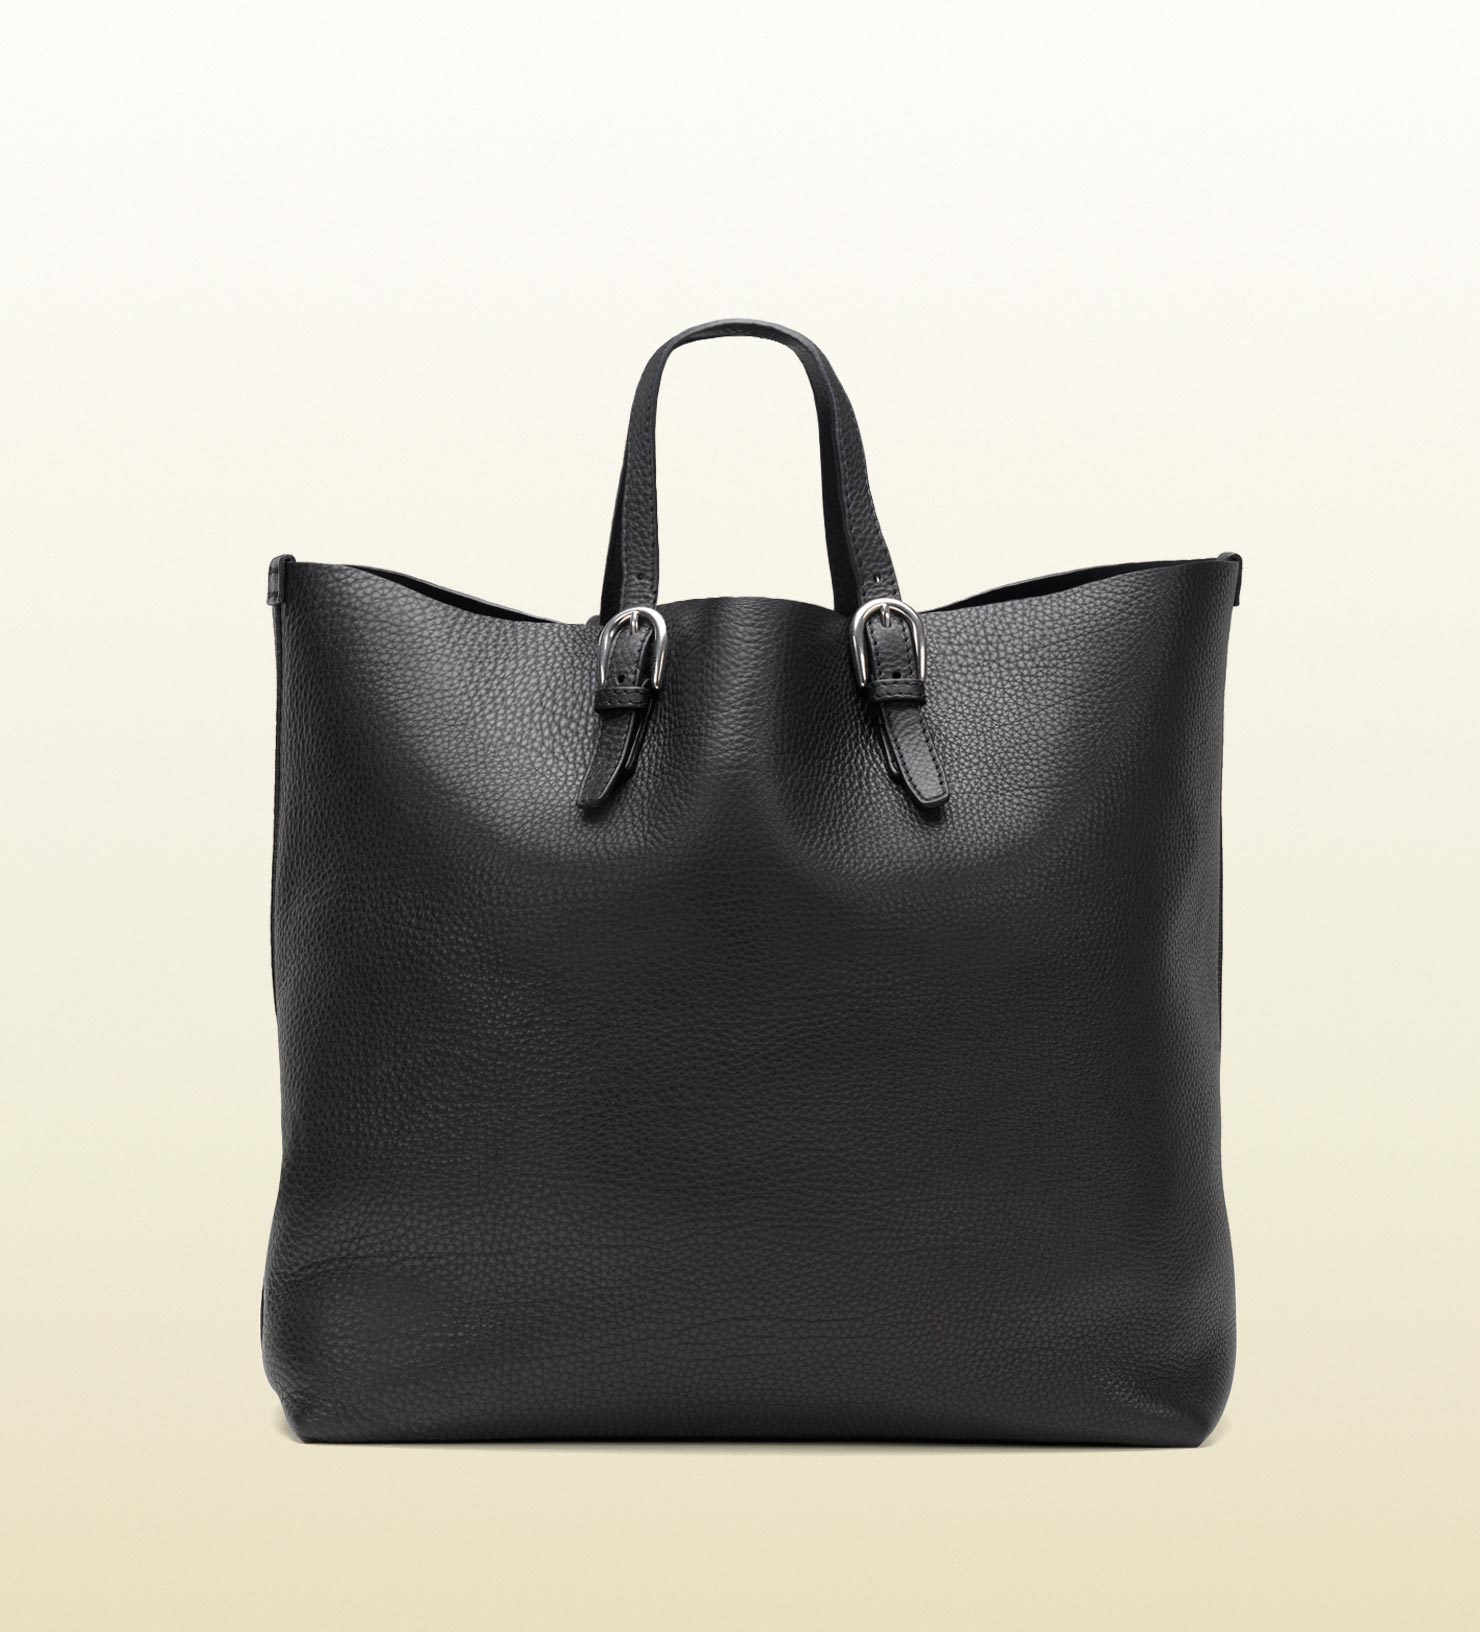 Lyst - Gucci Soft Tote Bag in Black for Men